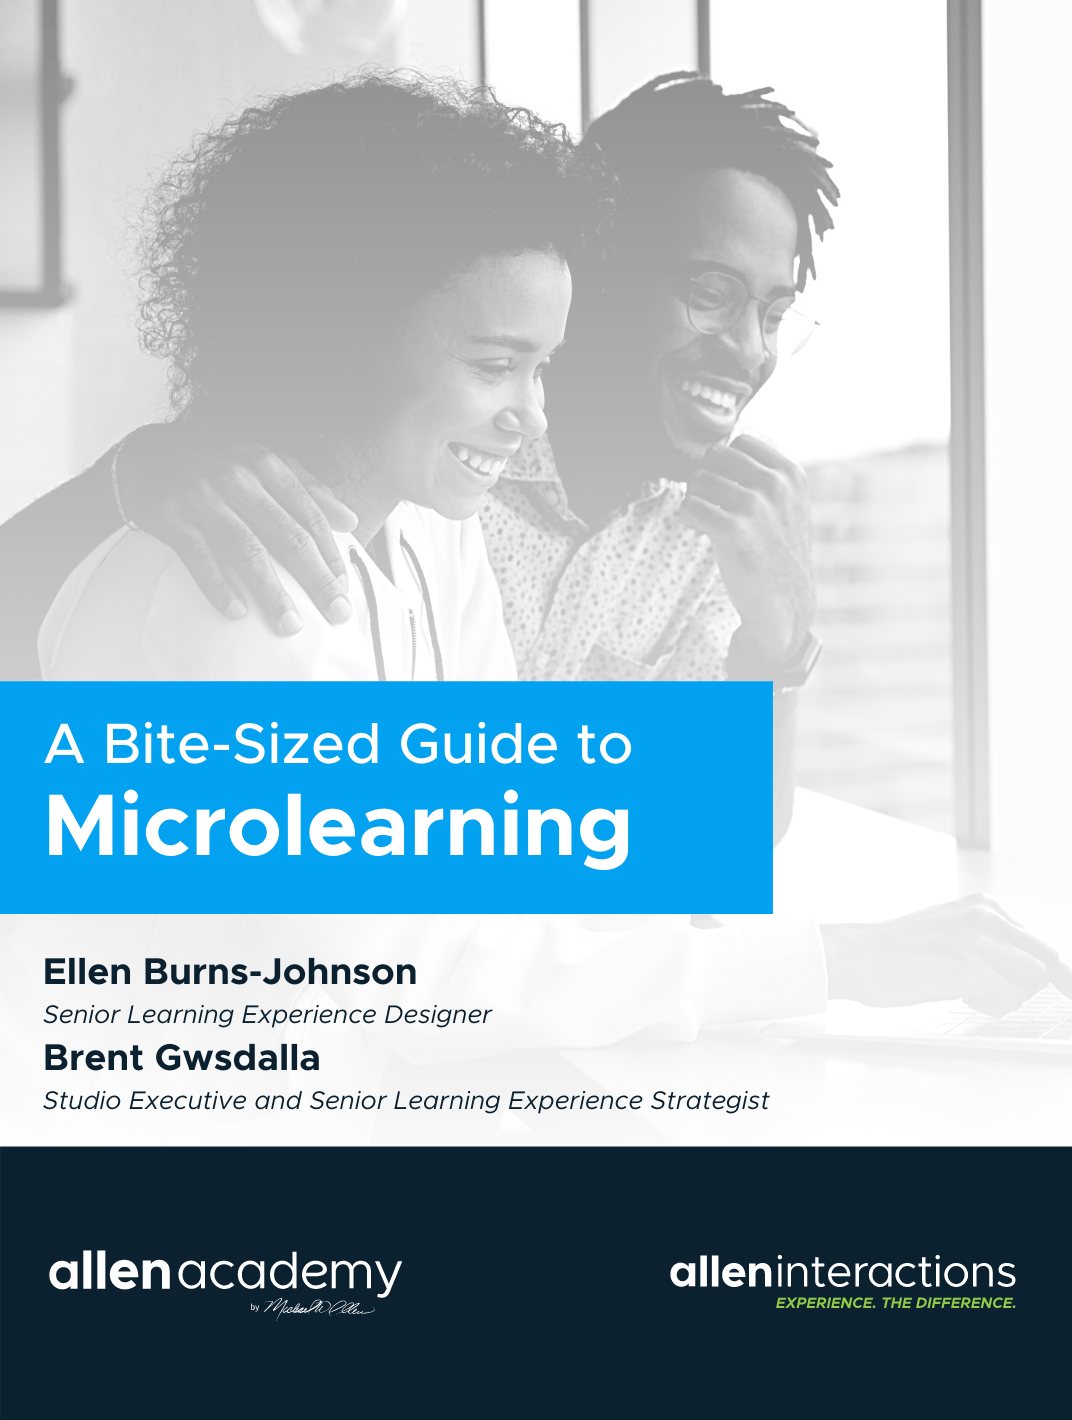 A Bite-Sized Guide To Microlearning